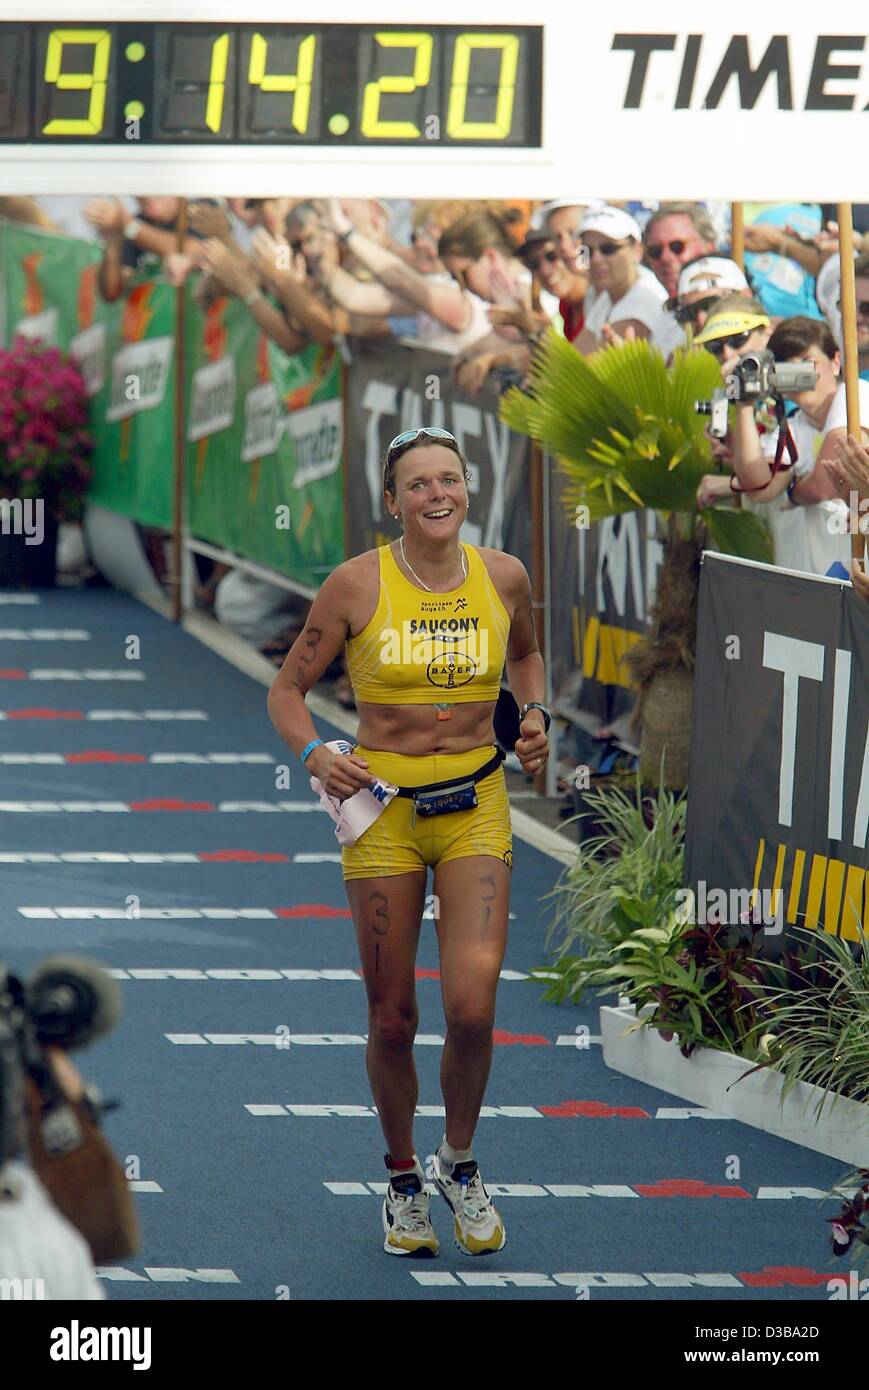 (dpa) - German athlete Nina Kraft arrives second at the finish line of the Women's Ironman Triathlon World Championship in Kailua-Kona, Hawaii, 19 October 2002. Kraft completed the course of 3.8 km swimming, 180 km cycling and a marathon in 9 hours, 14 minutes and 24 seconds. Stock Photo